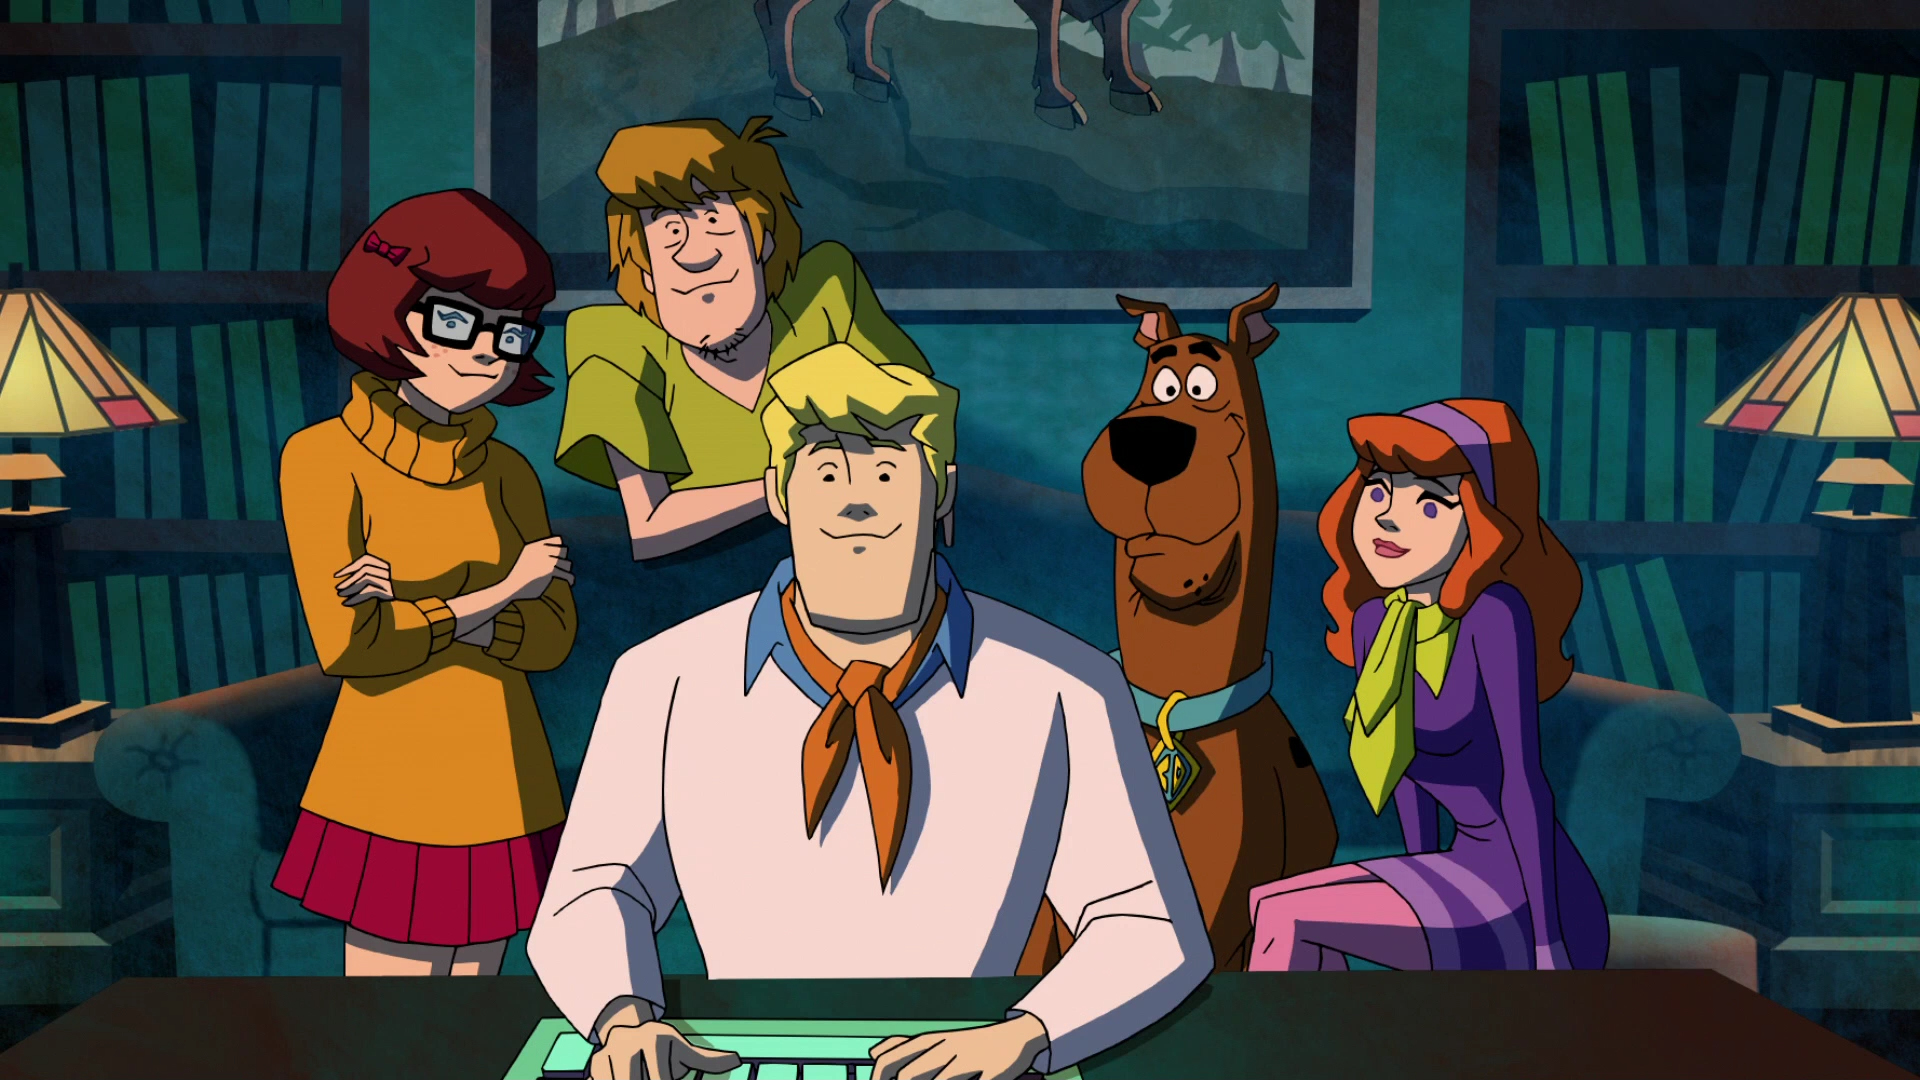 Velma, Shaggy, Fred, Scooby-Doo, and Daphne look at something off screen